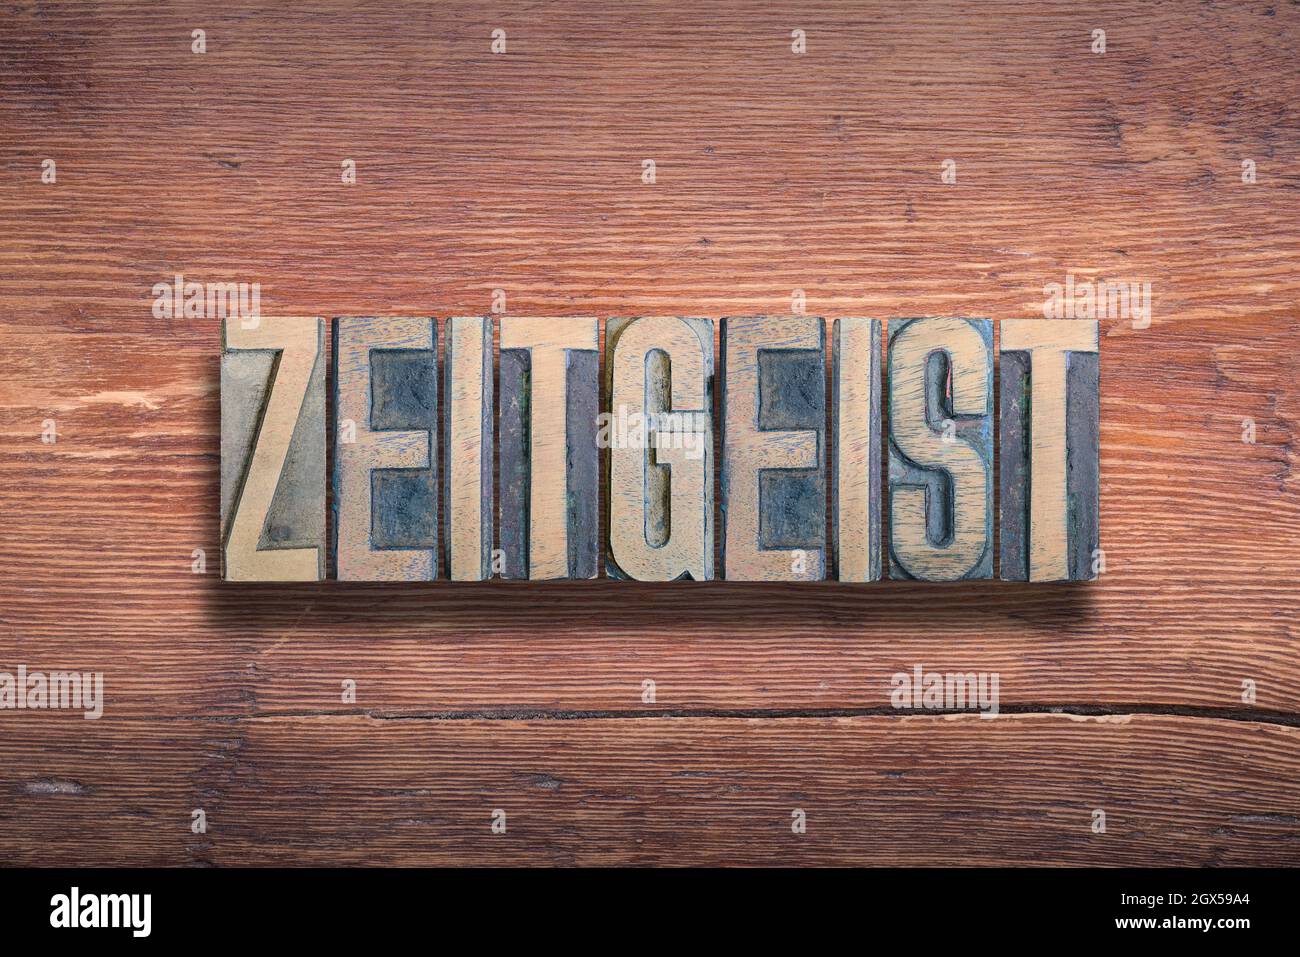 zeitgeist word combined on vintage varnished wooden surface Stock Photo